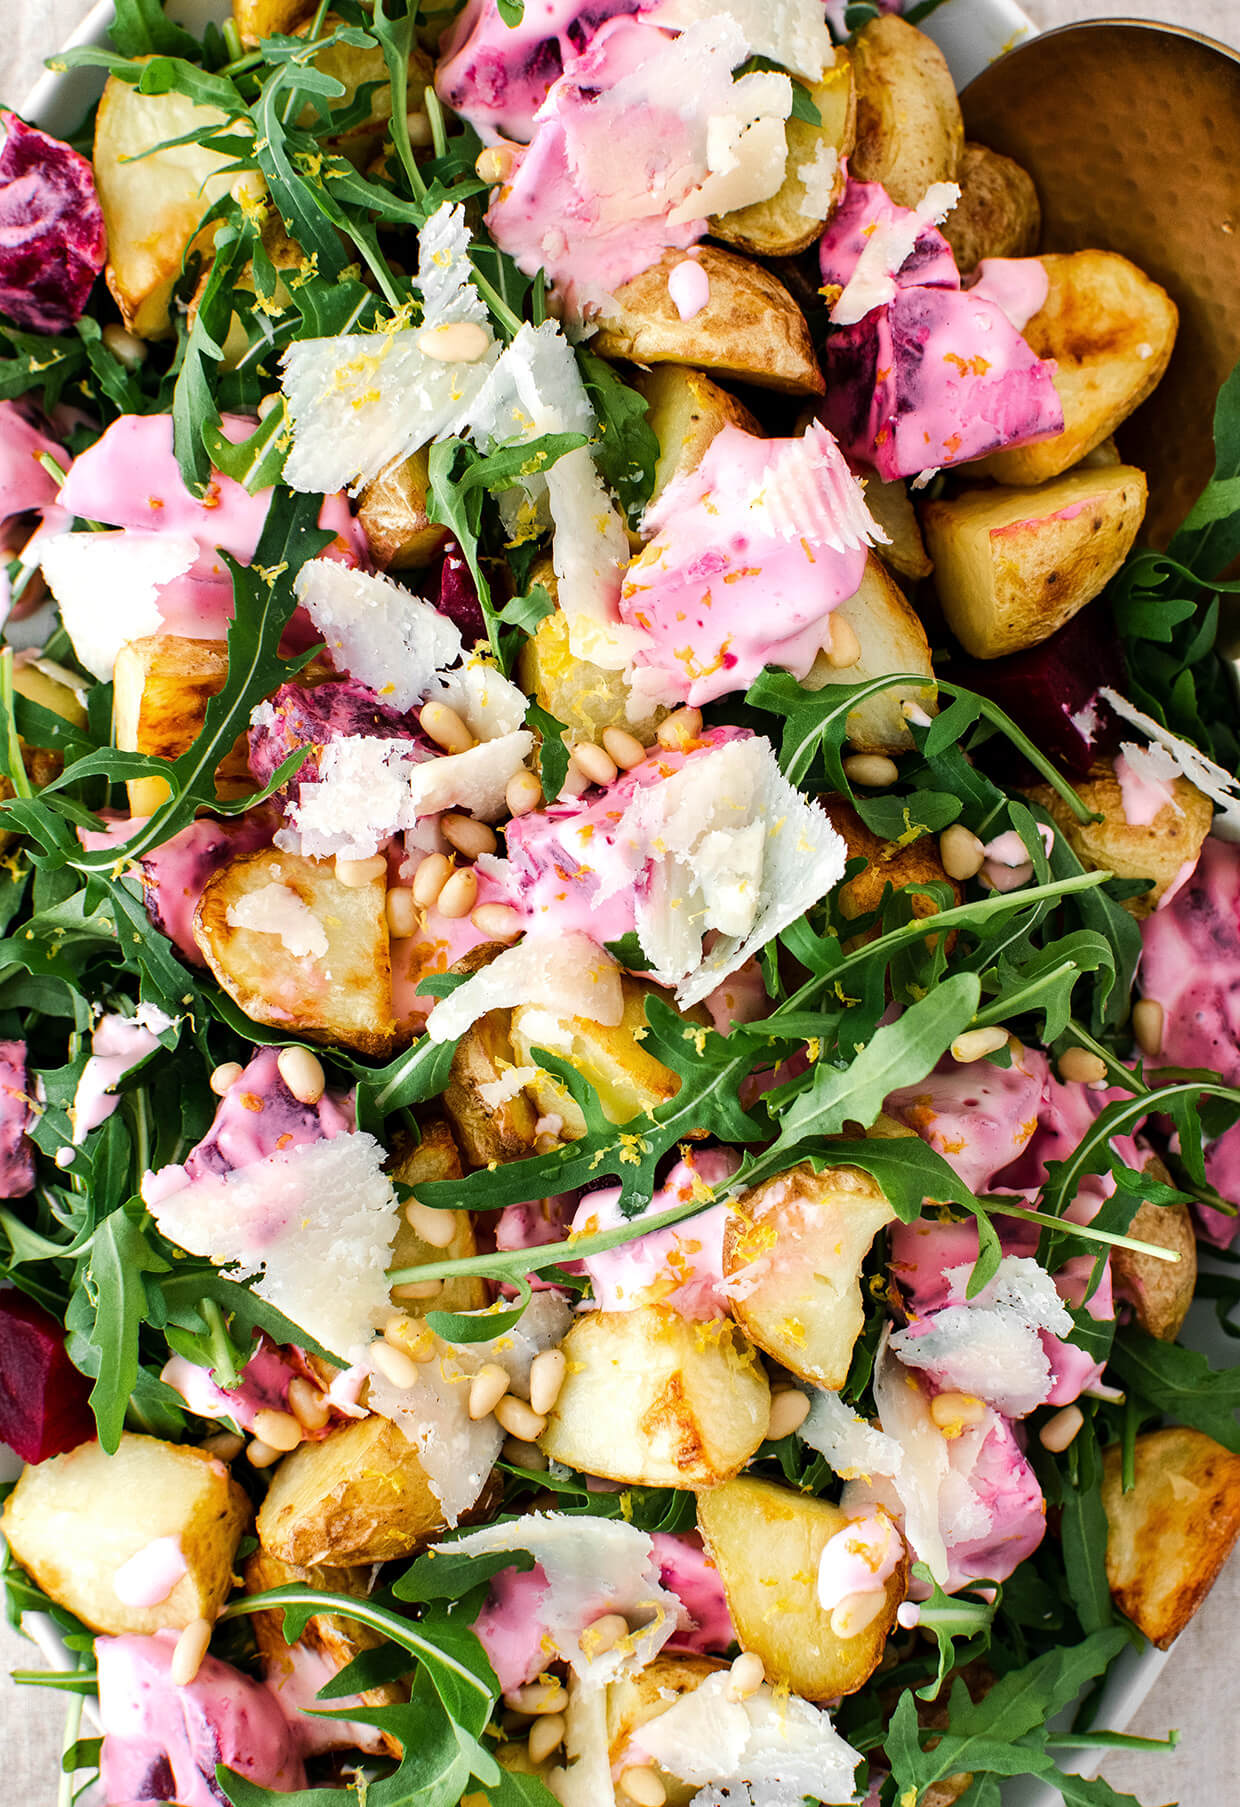 close up of roasted potato salad with beets, arugula, cheese shavings, pine nuts